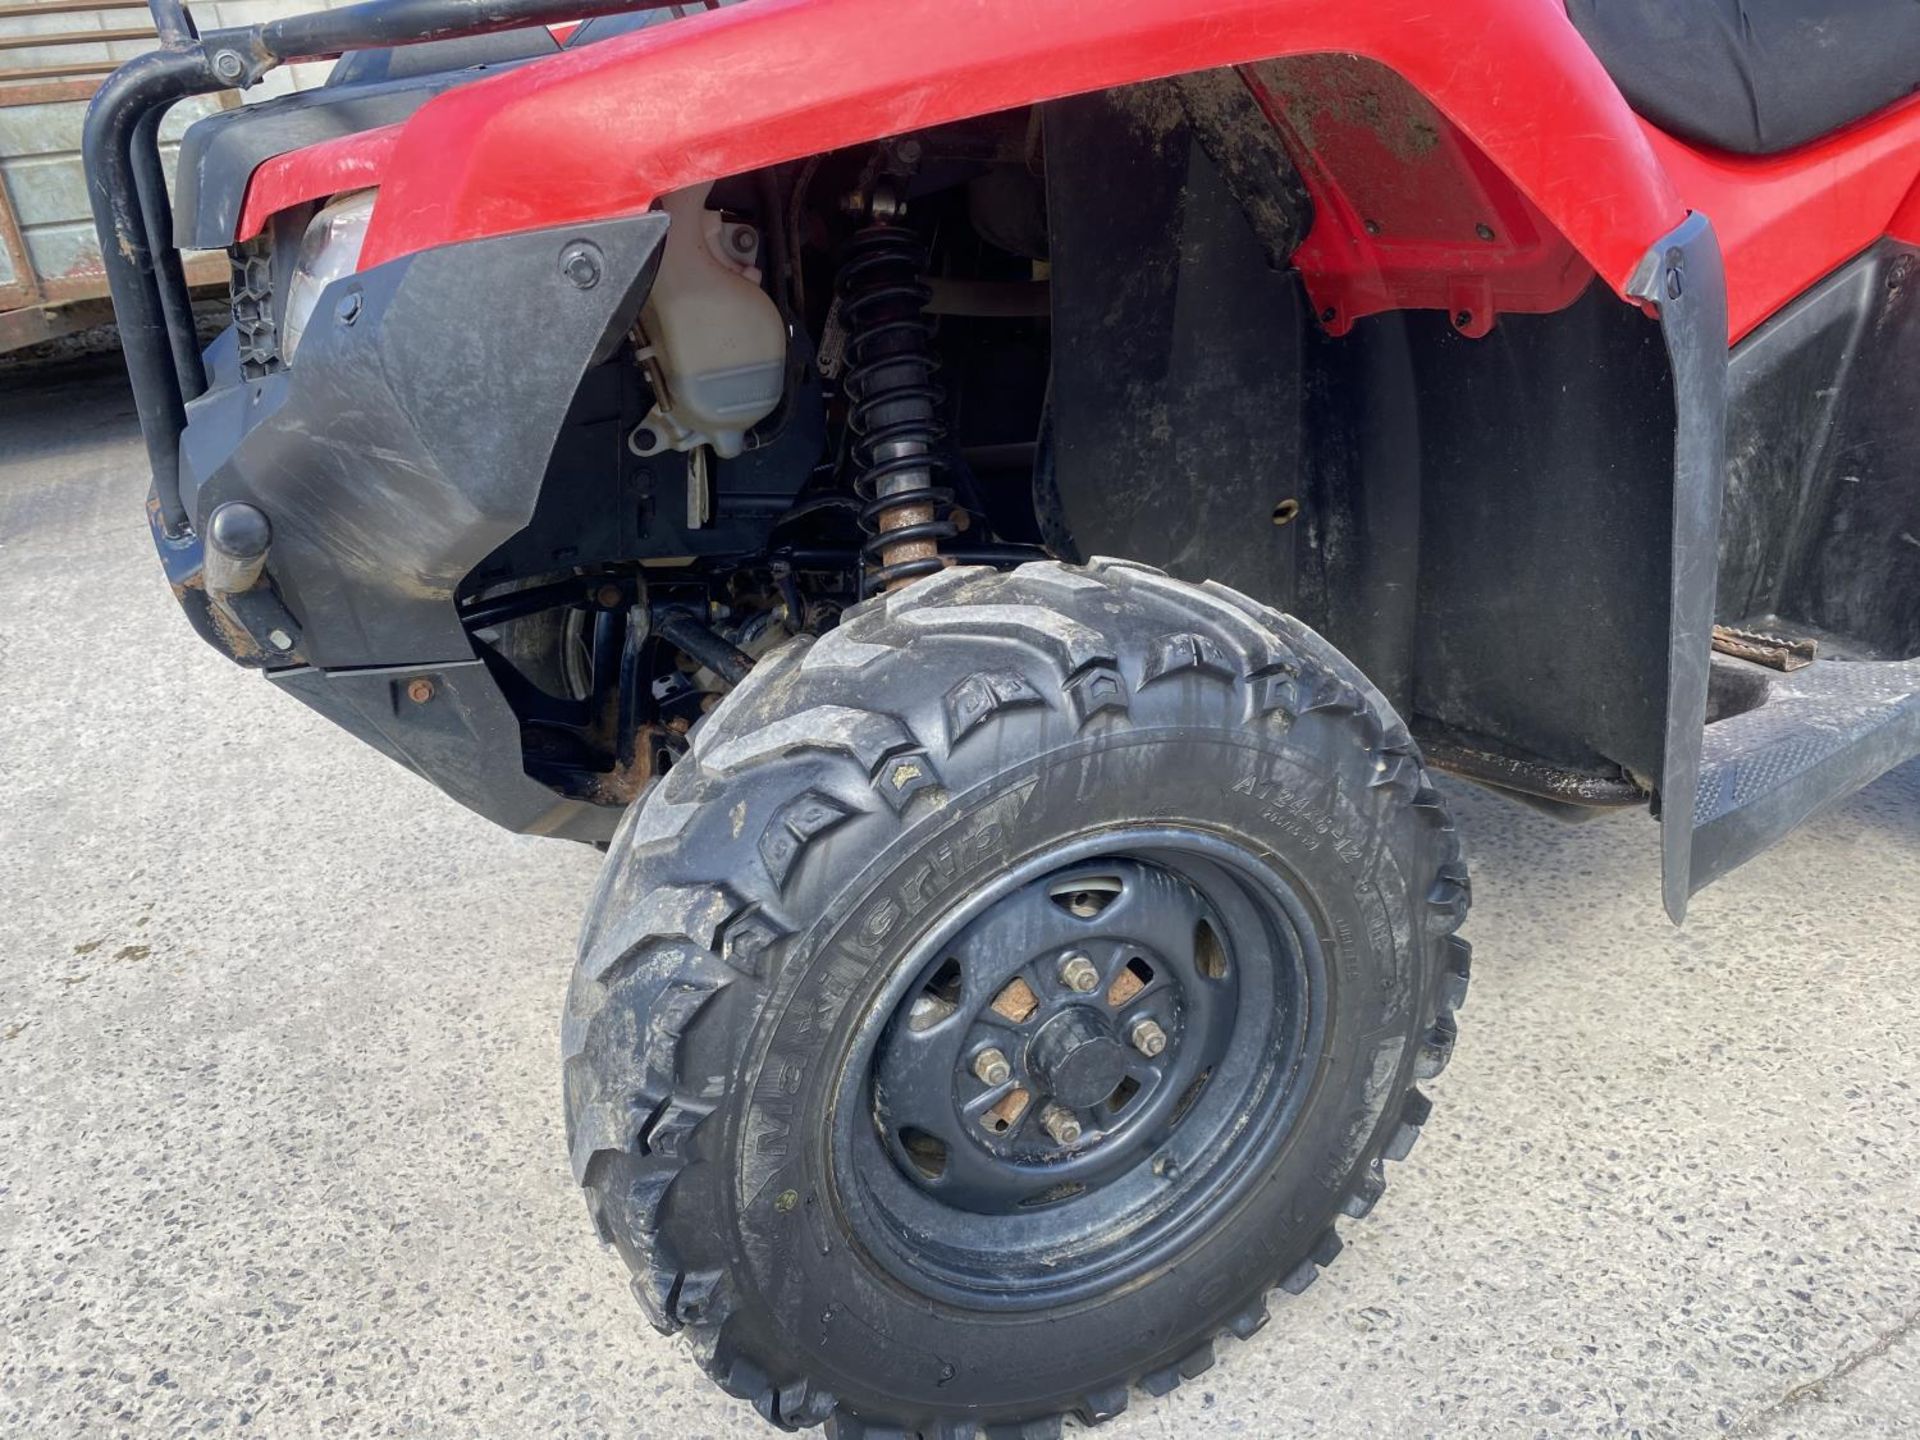 A 2017 HONDA TRX 420 QUAD BIKE - SEE VIDEO OF VEHICLE STARTING AND RUNNING AT https://www.youtube. - Image 9 of 10